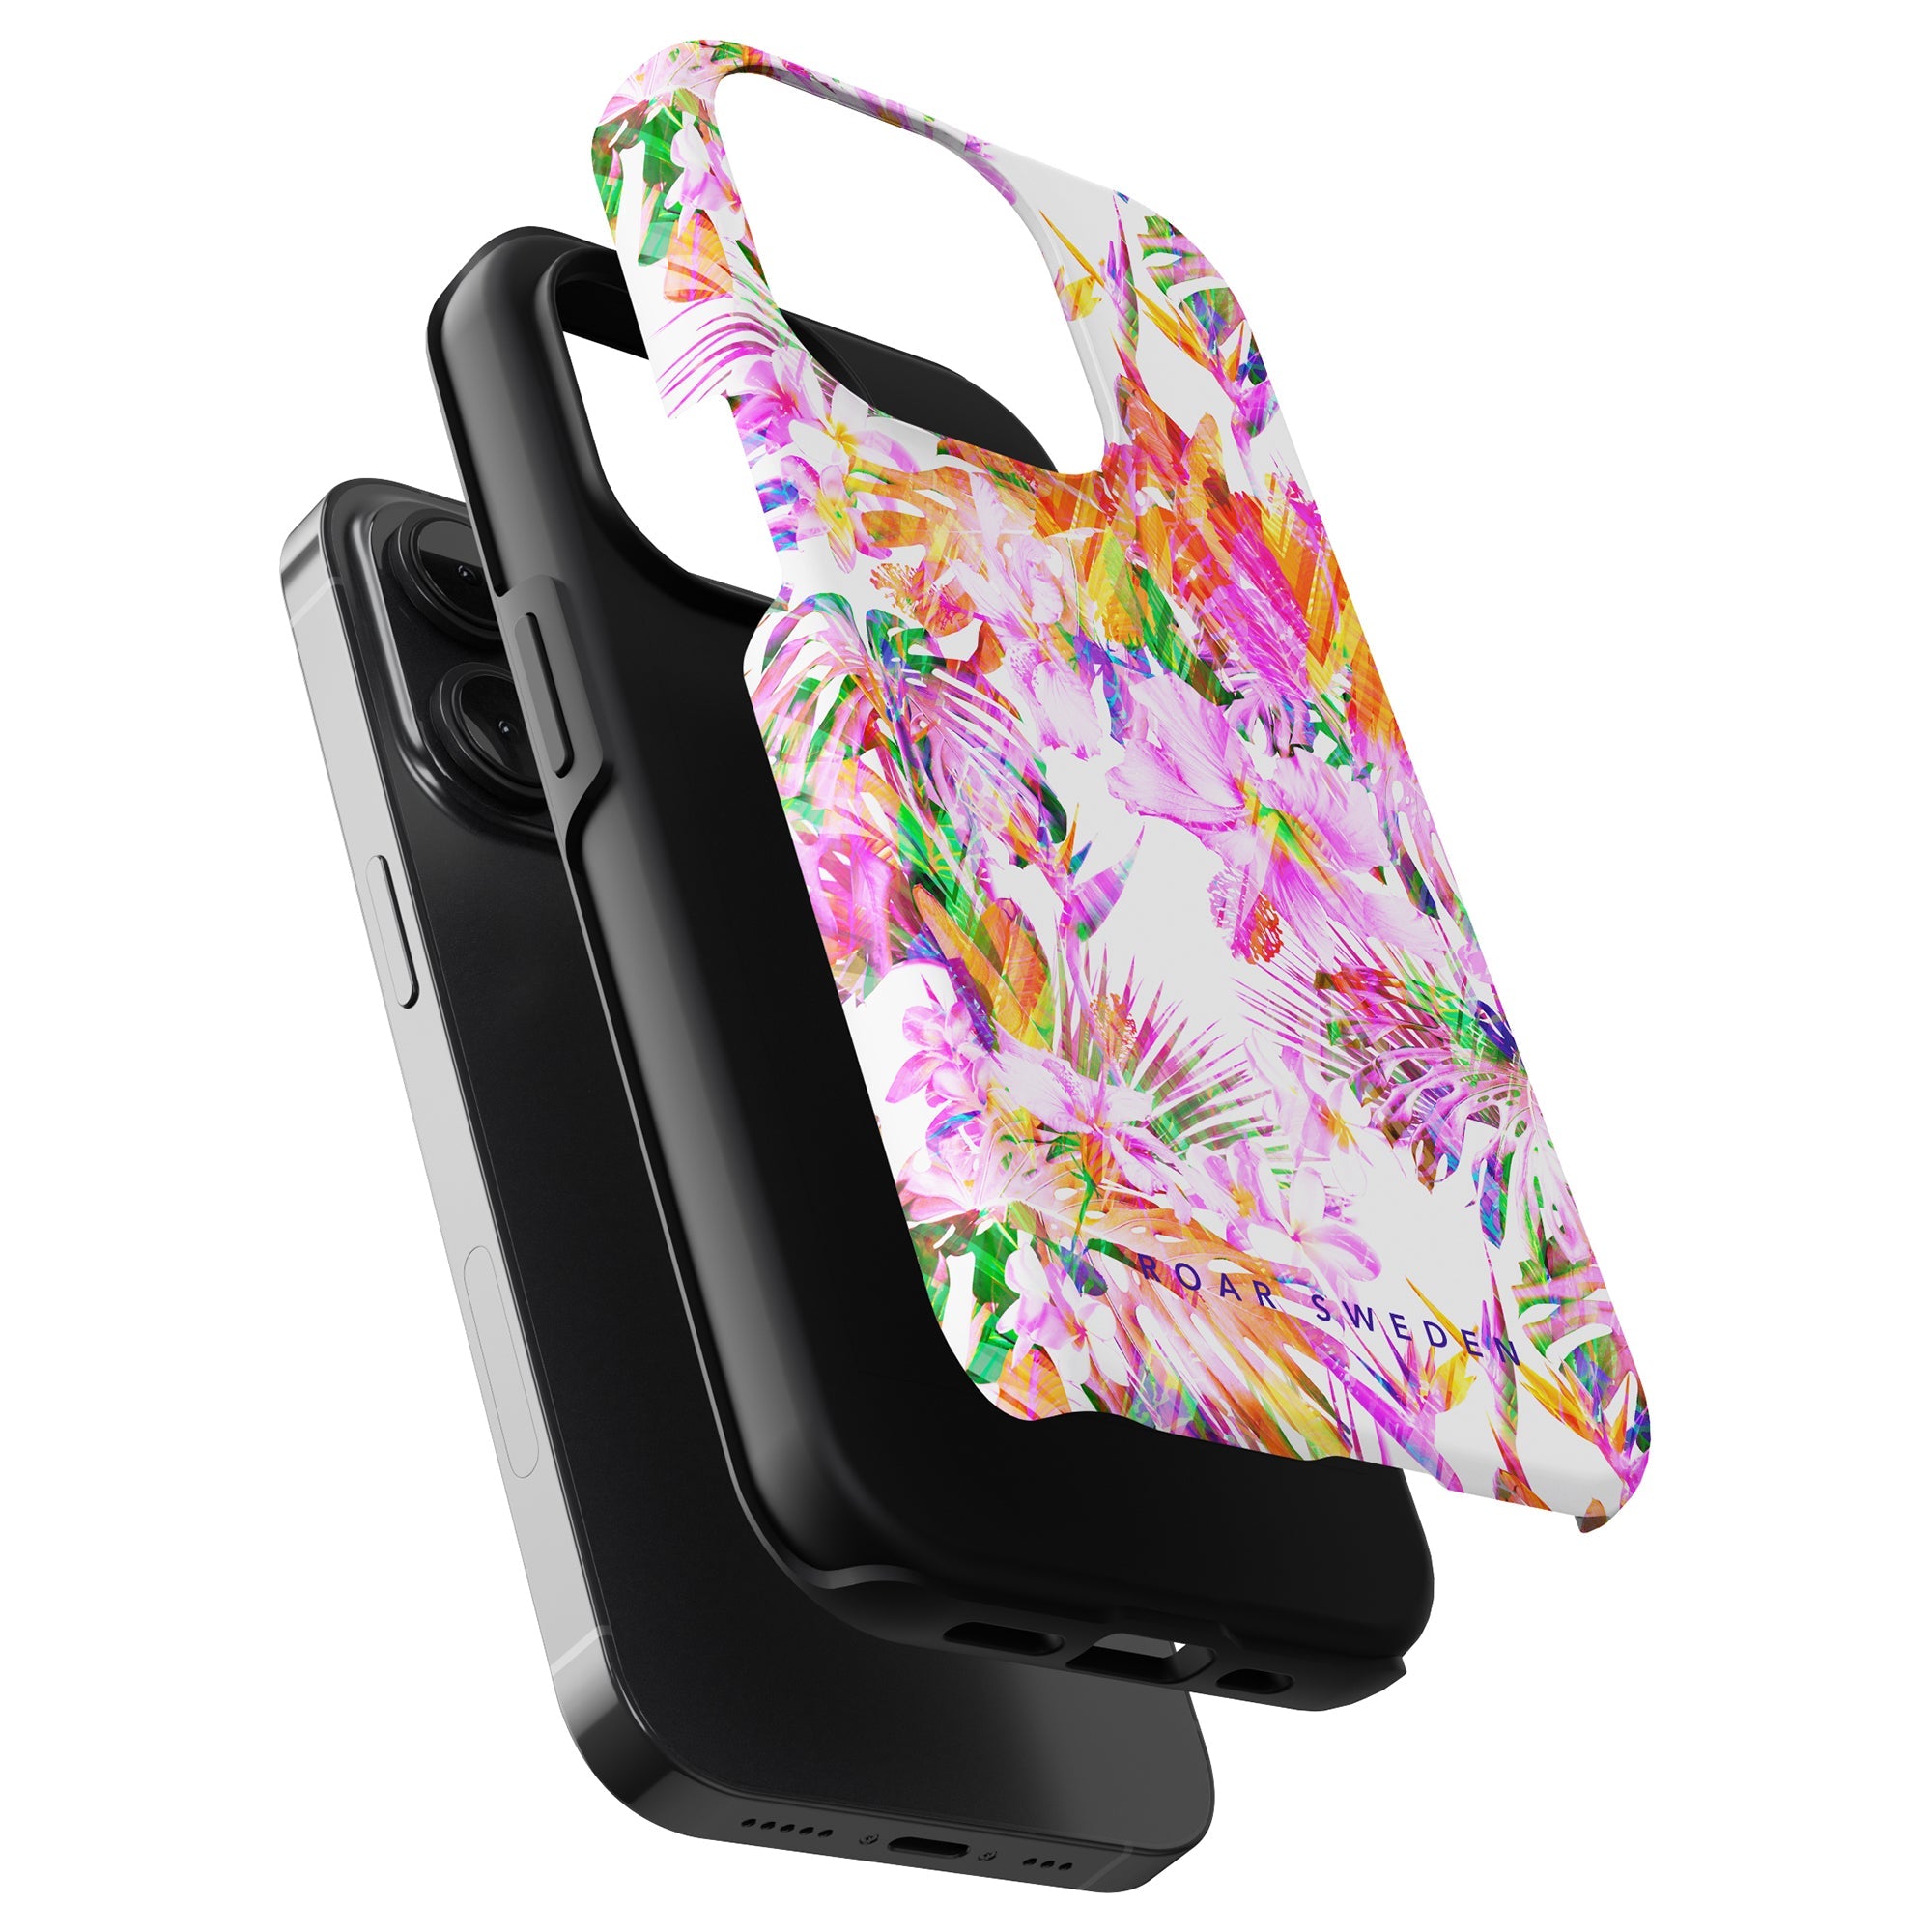 Transform your iPhone 11 Pro into a Summer Vibe - Tough case with this colorful floral case. Crafted from a high-quality material, this mobileskal adds a touch of elegance to your device.